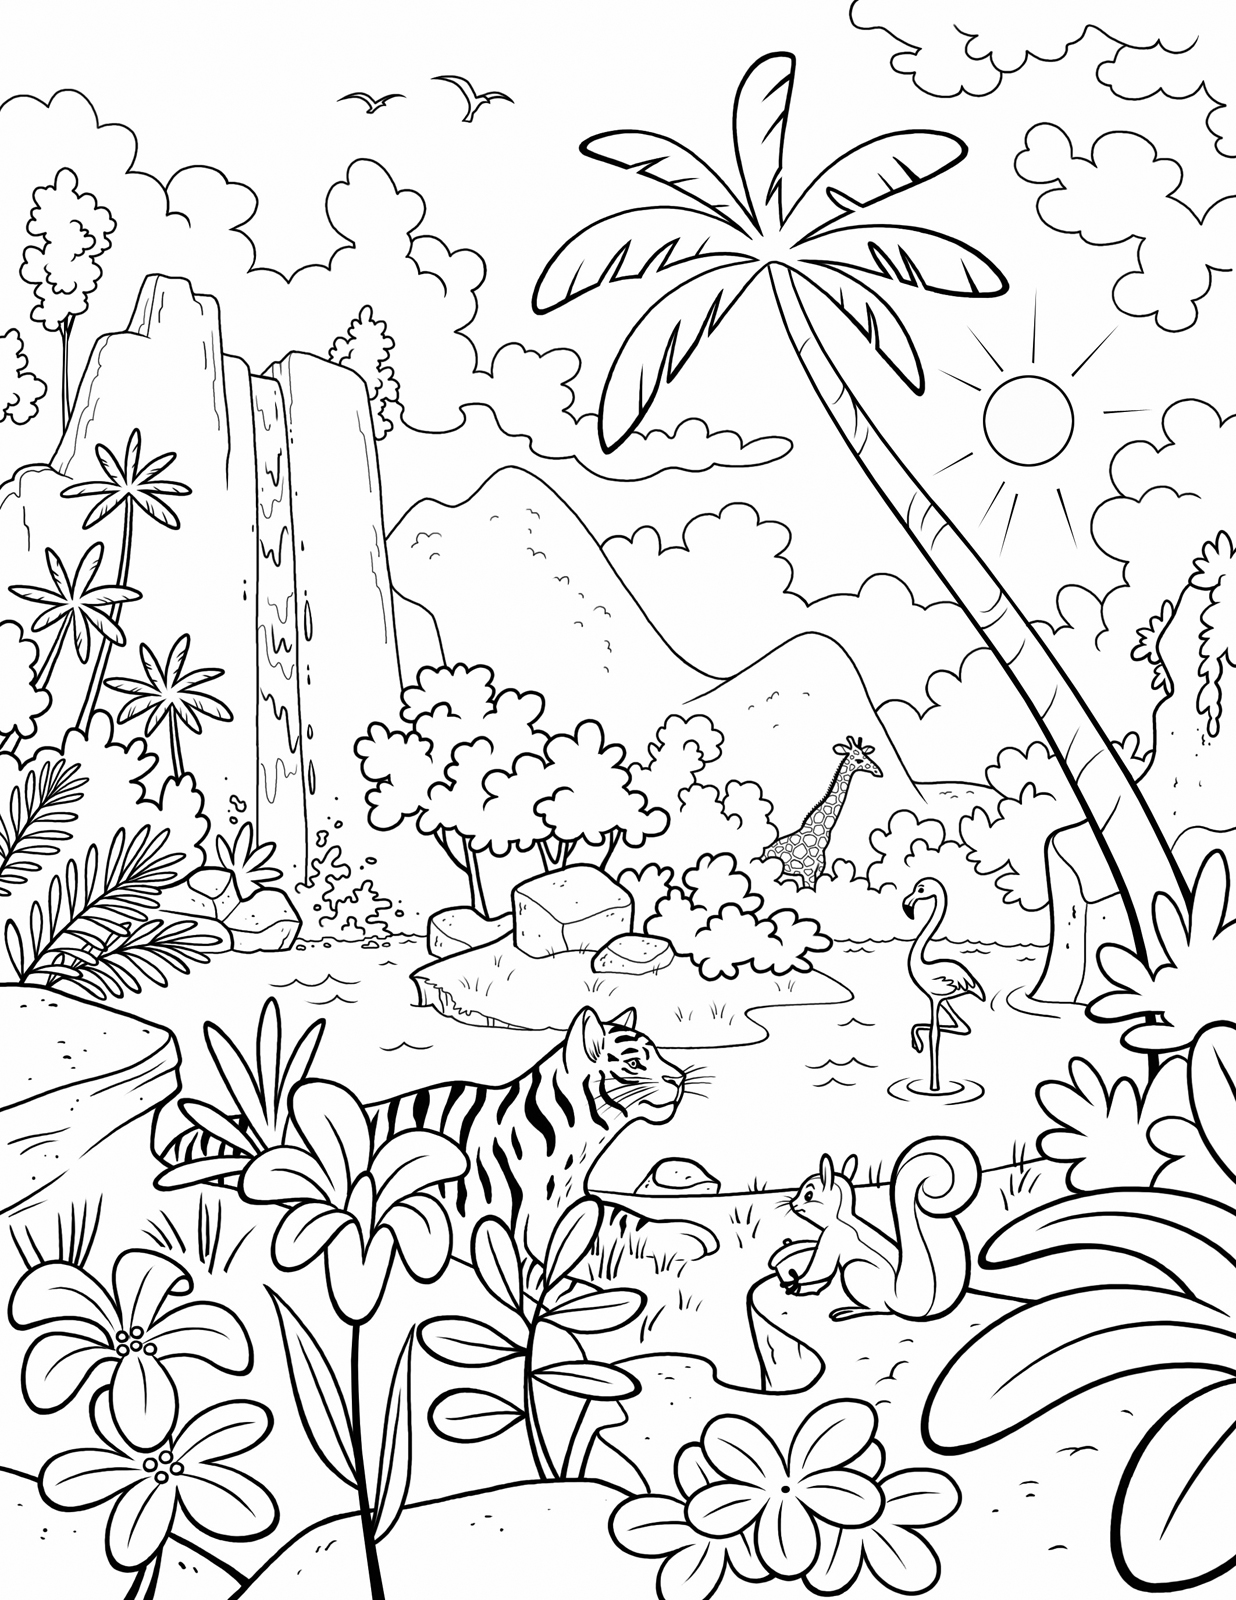 Waterfall Coloring Pages For Kids at GetDrawings | Free download